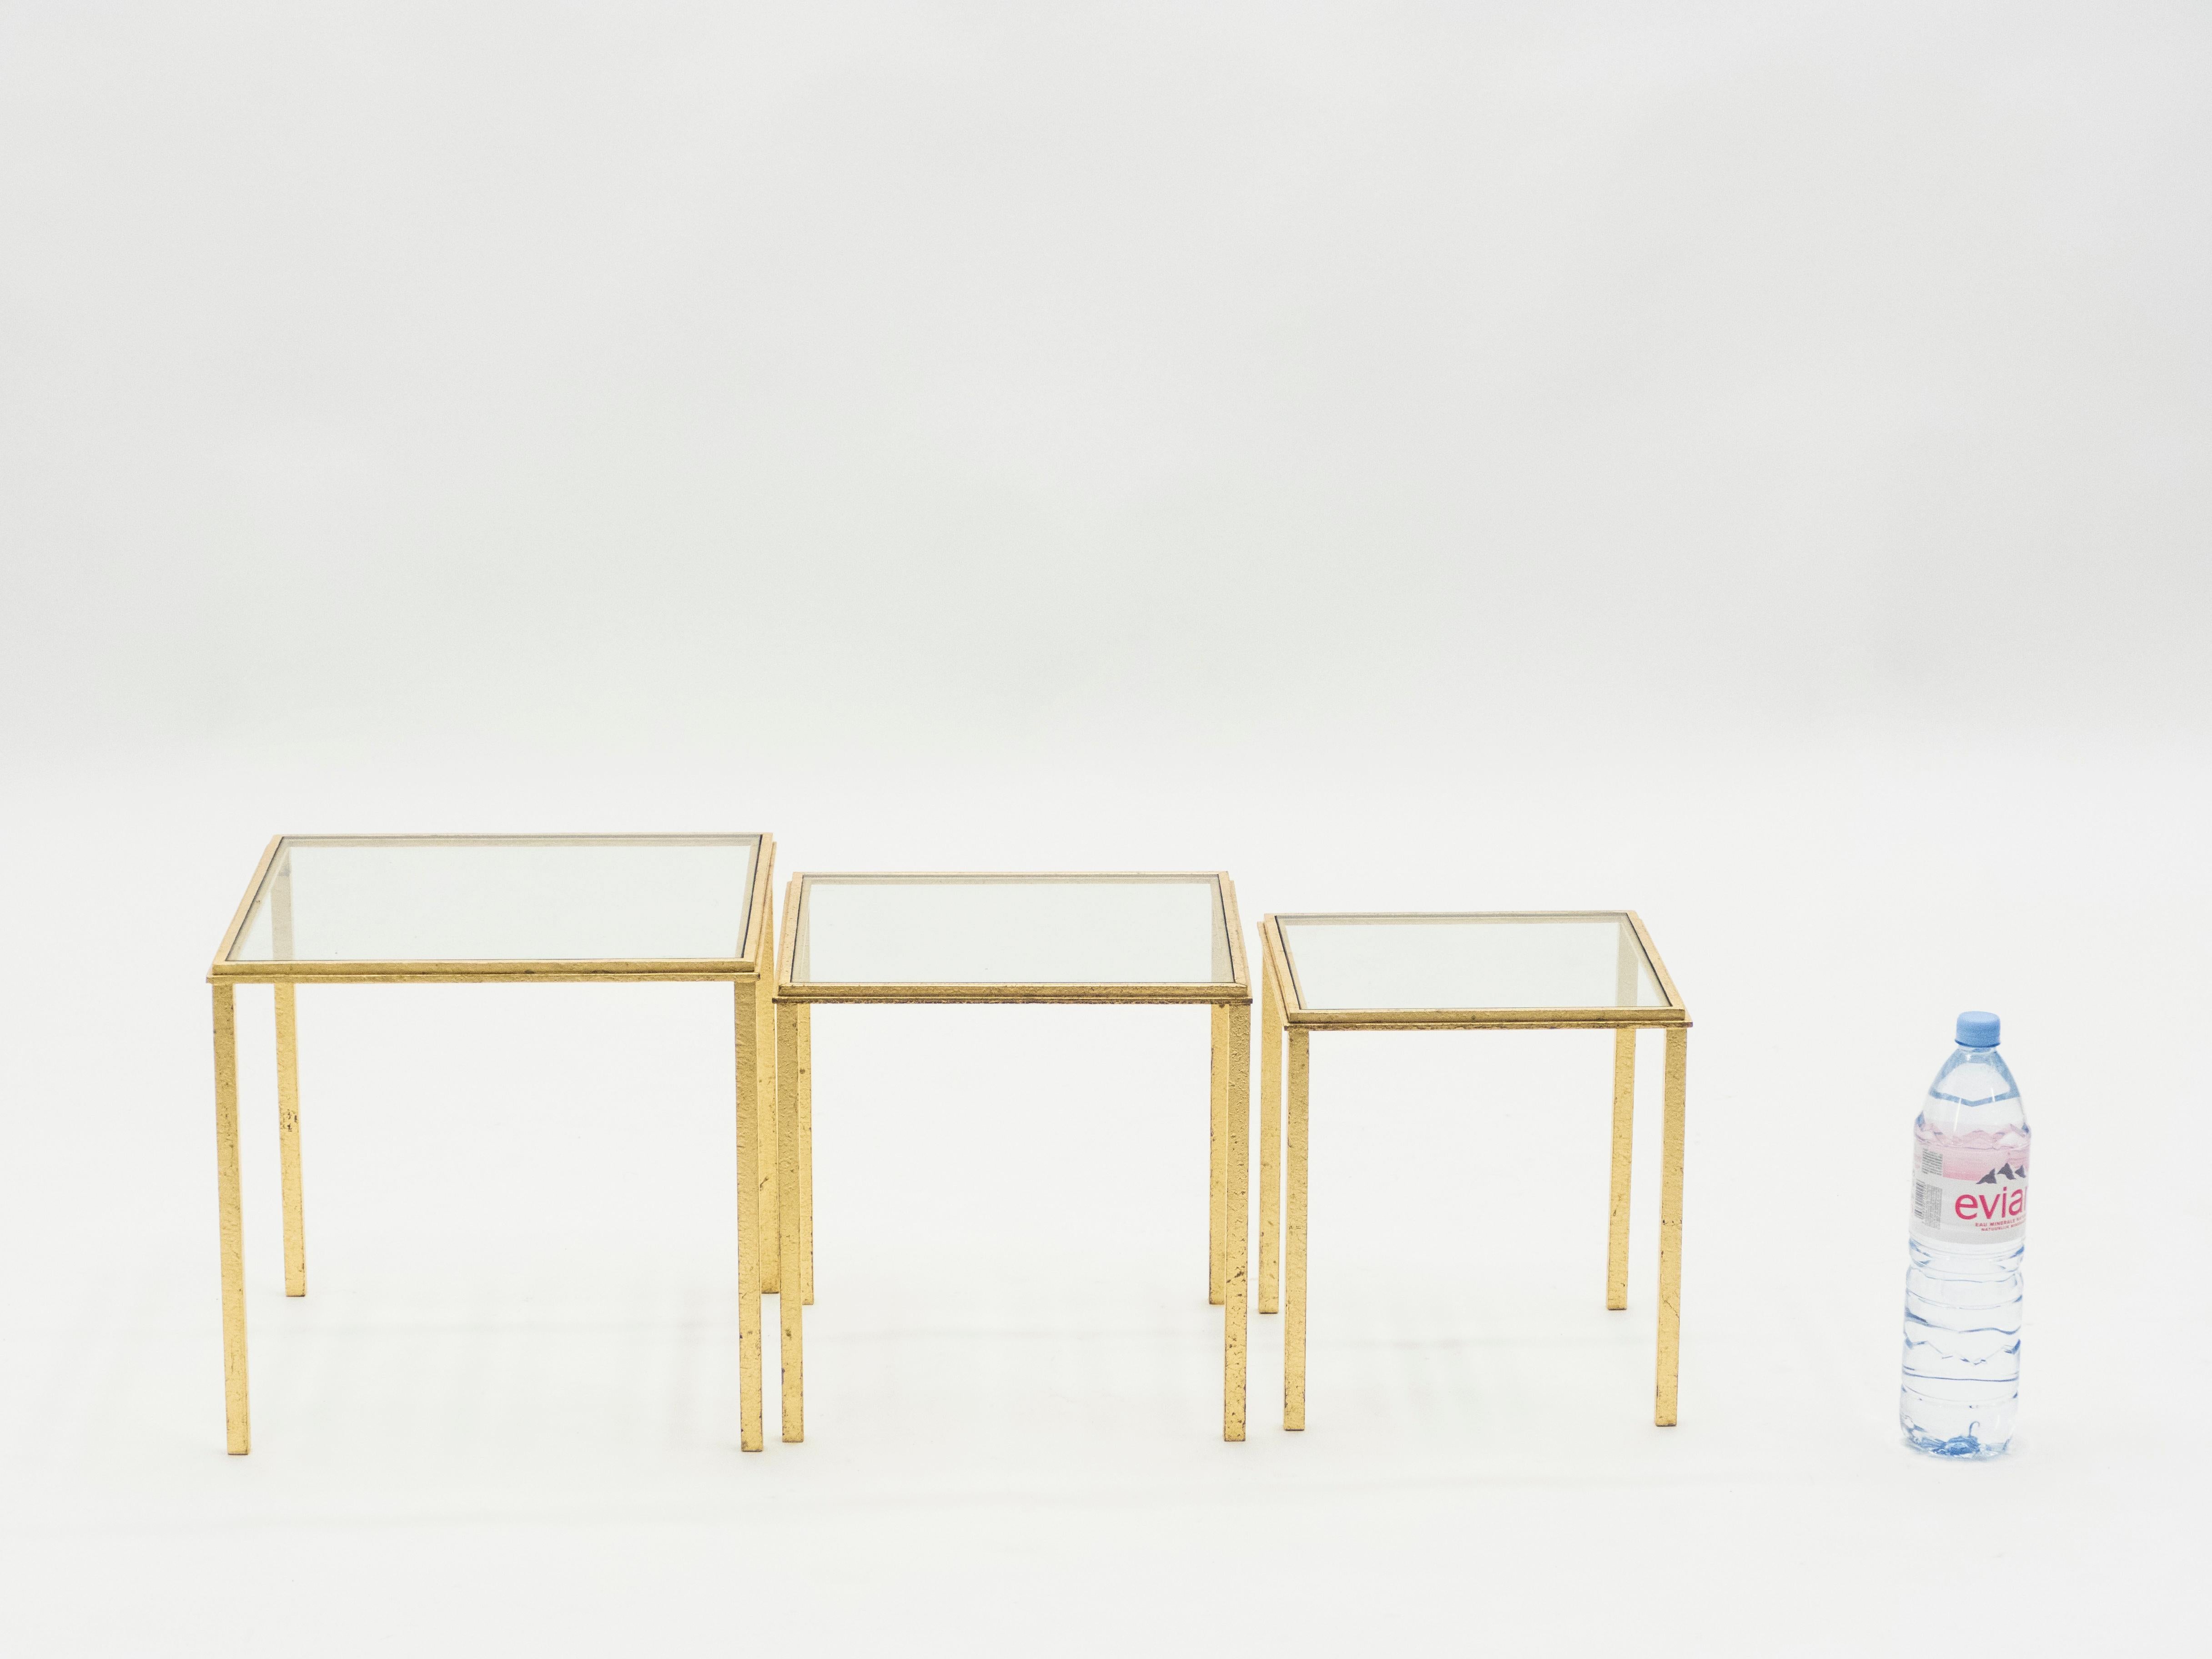 Midcentury Roger Thibier Gilt Wrought Iron Gold Leaf Nesting Tables, 1960s For Sale 2